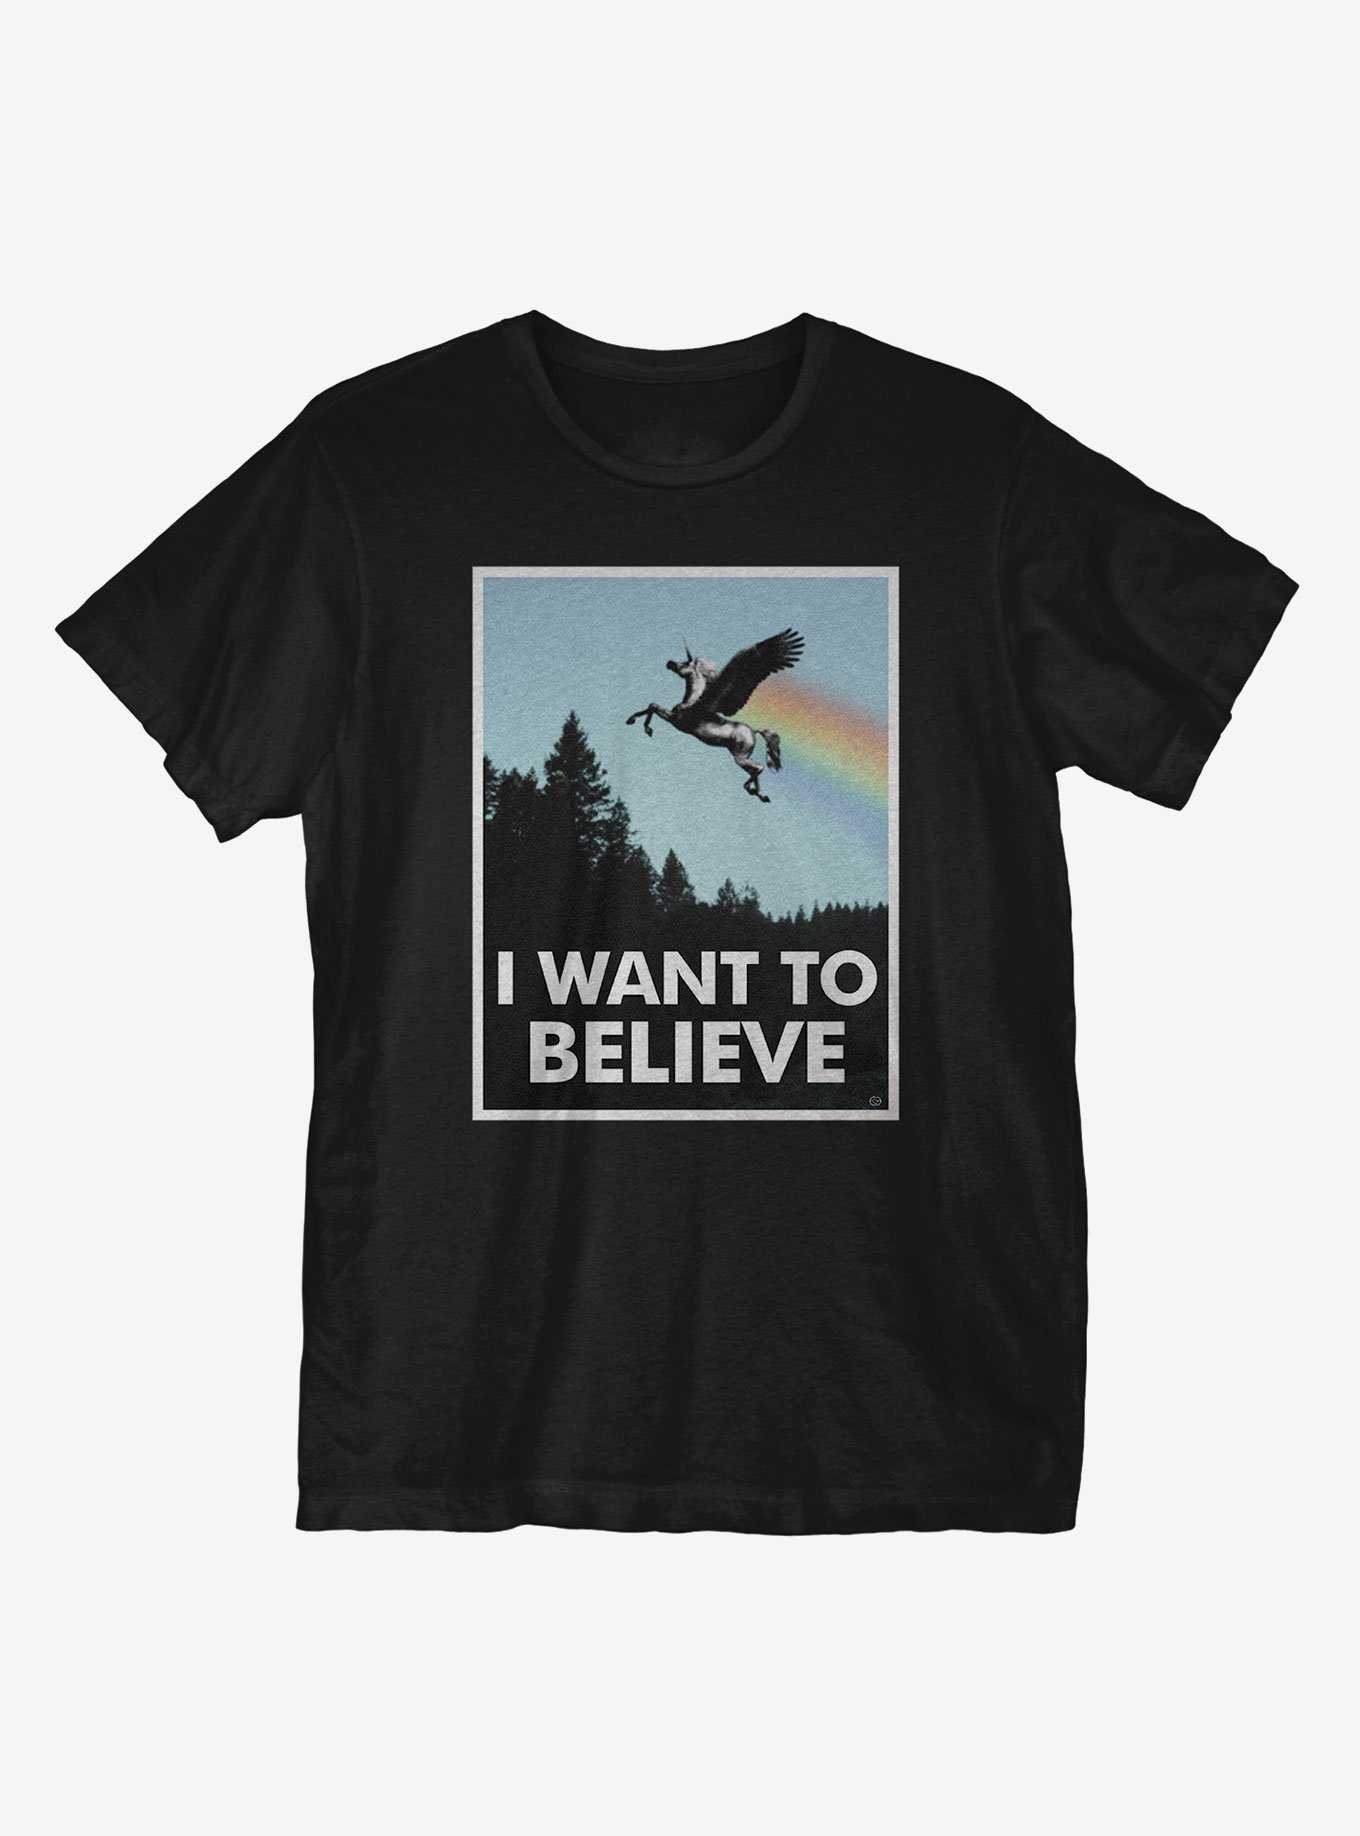 Believe Police Box T-Shirt, , hi-res